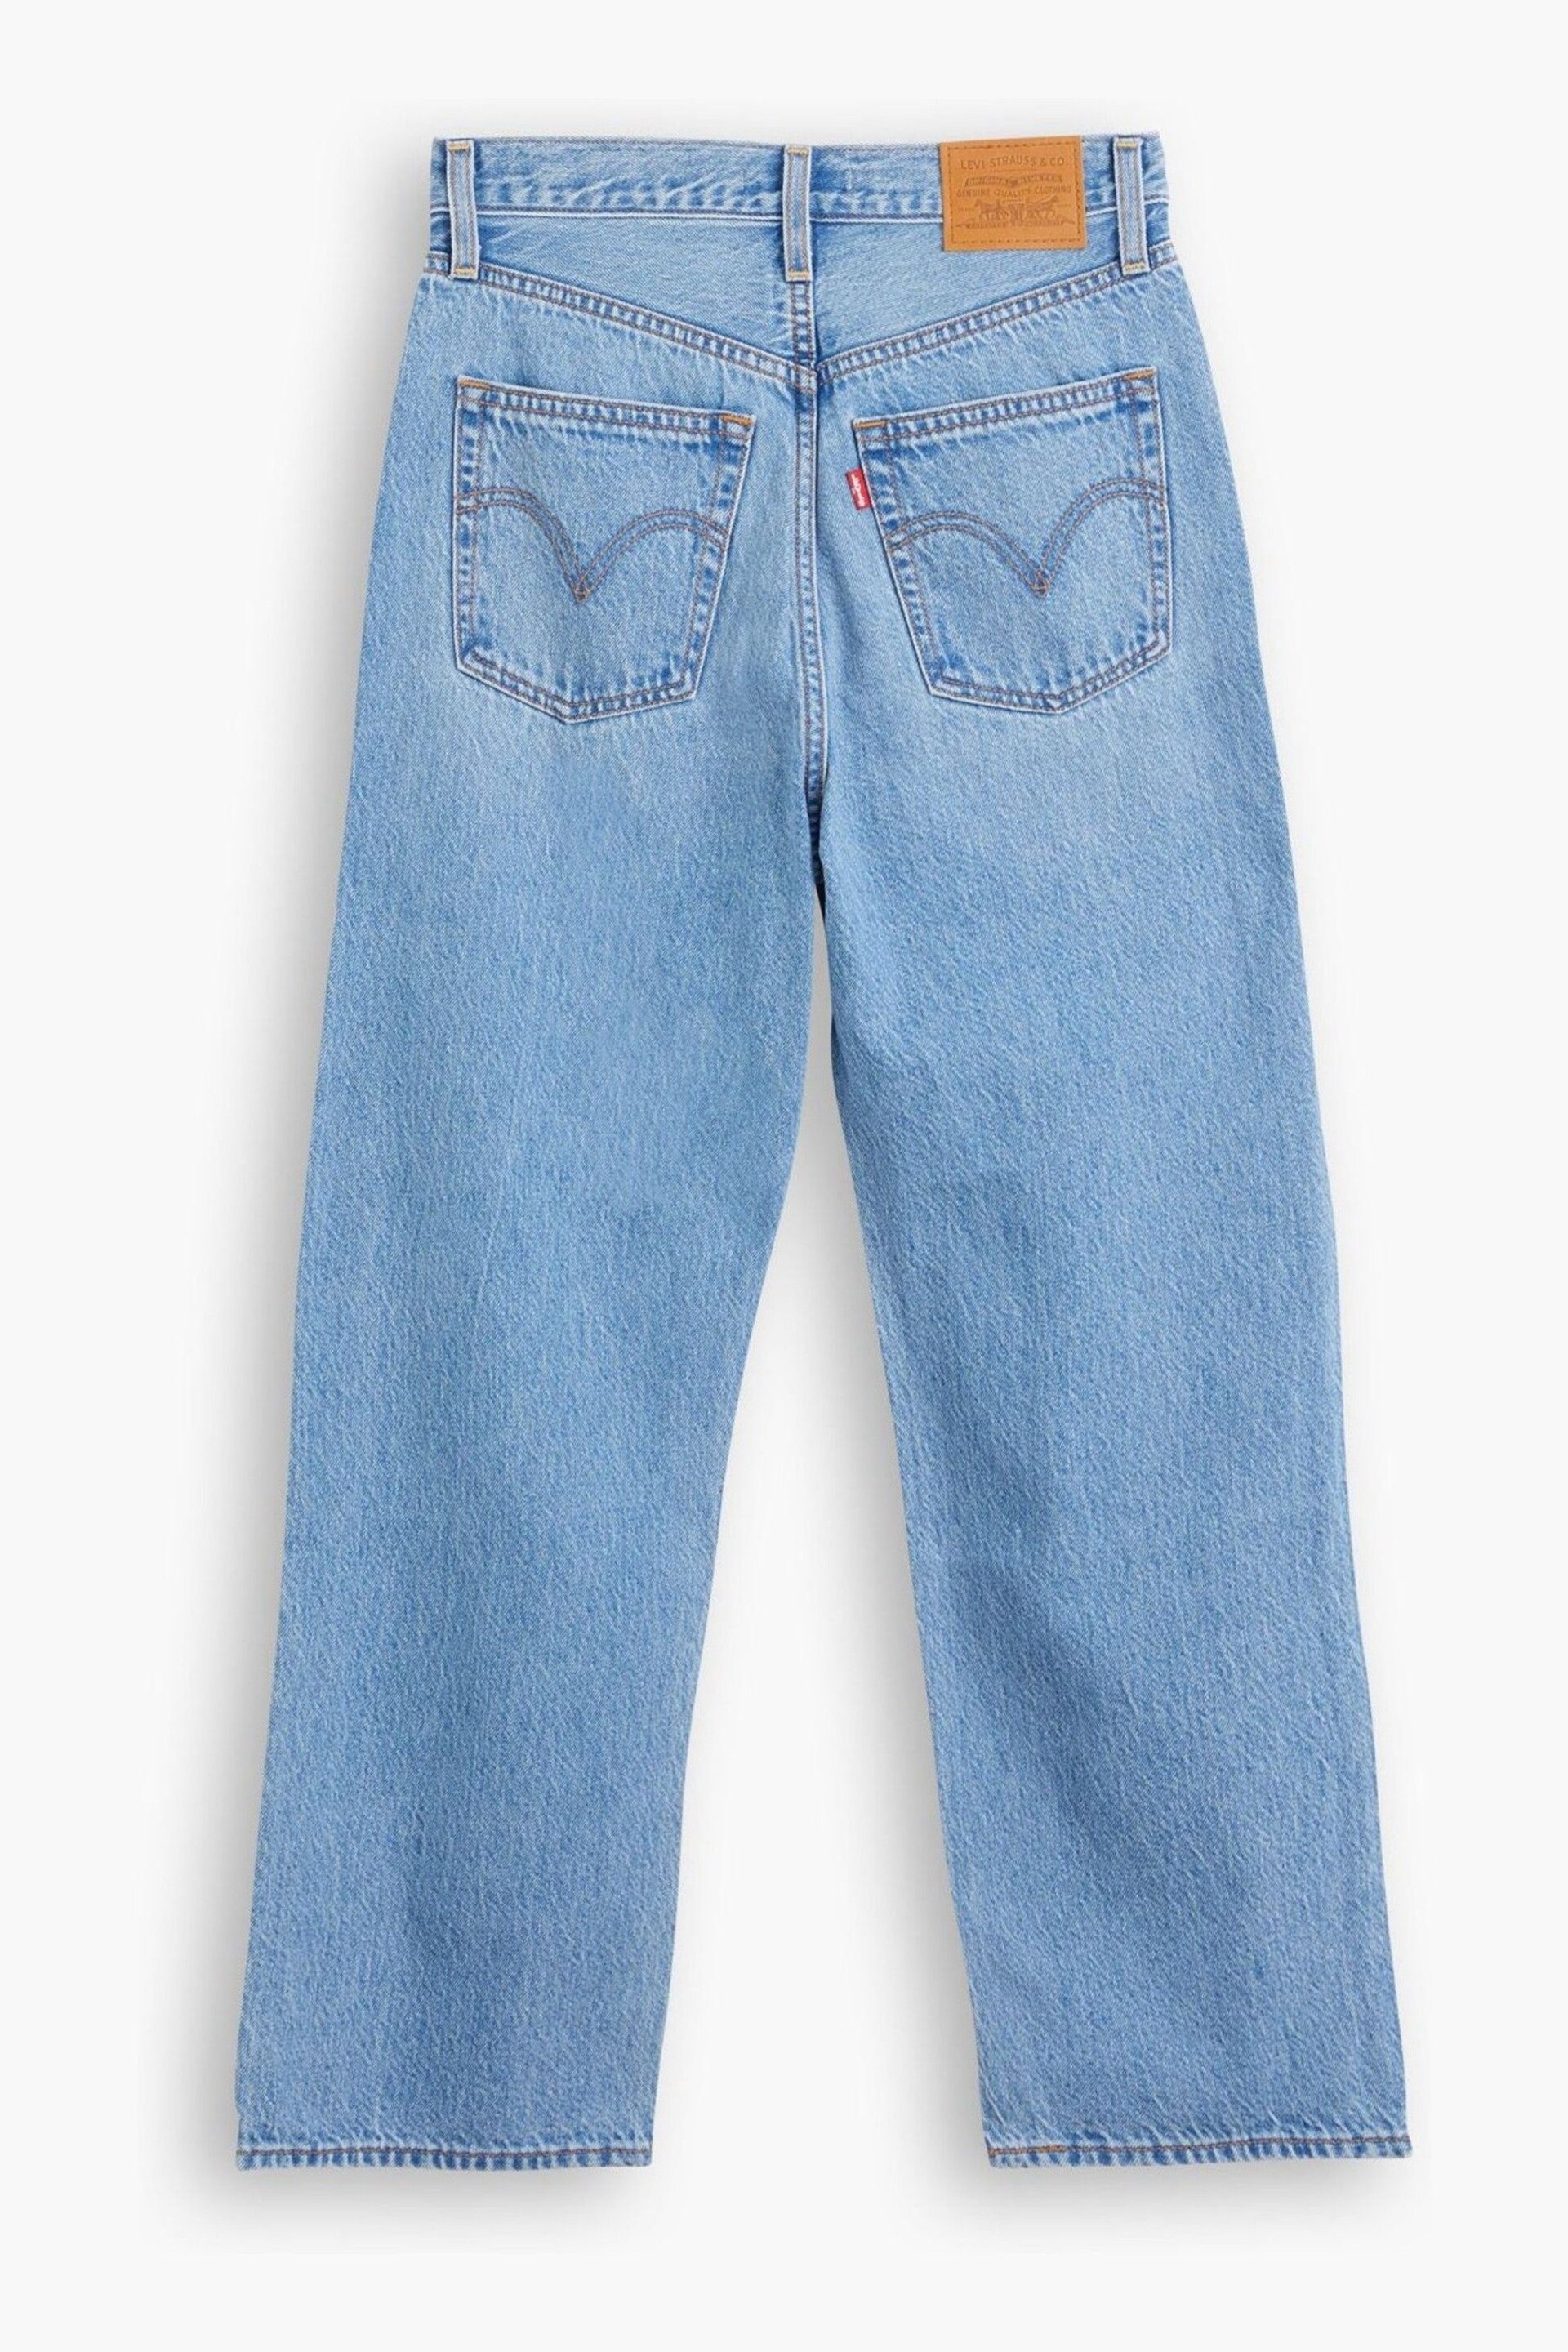 Levi's® In the Middle Ribcage Straight Ankle Jeans - Image 11 of 14